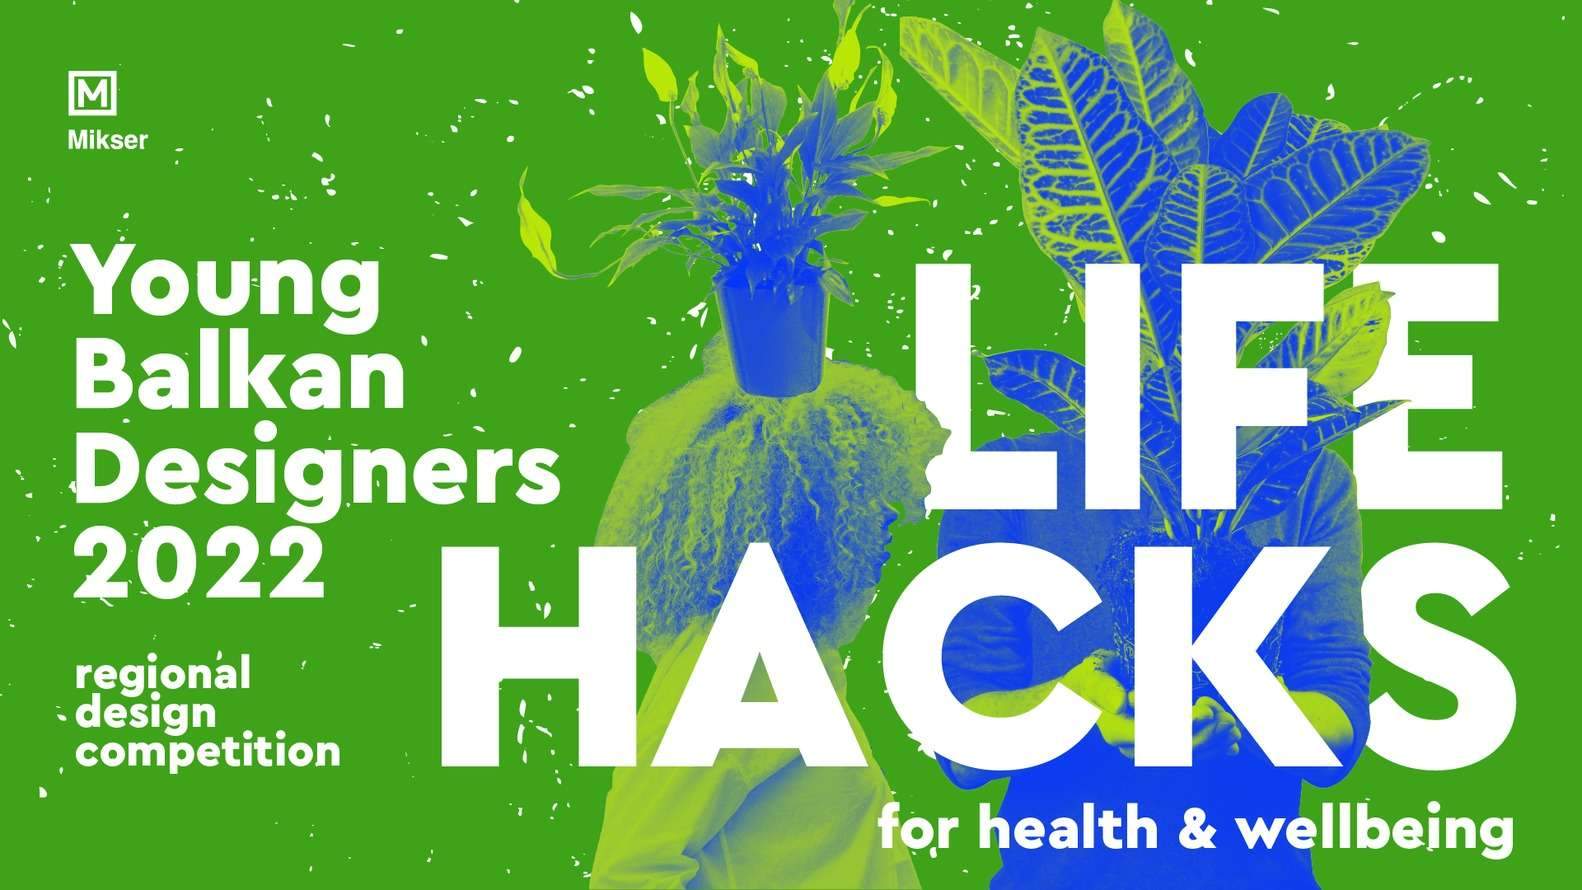 REGIONAL DESIGN COMPETITION YOUNG BALKAN DESIGNERS 2022: LIFE HACKS FOR HEALTH & WELLBEING